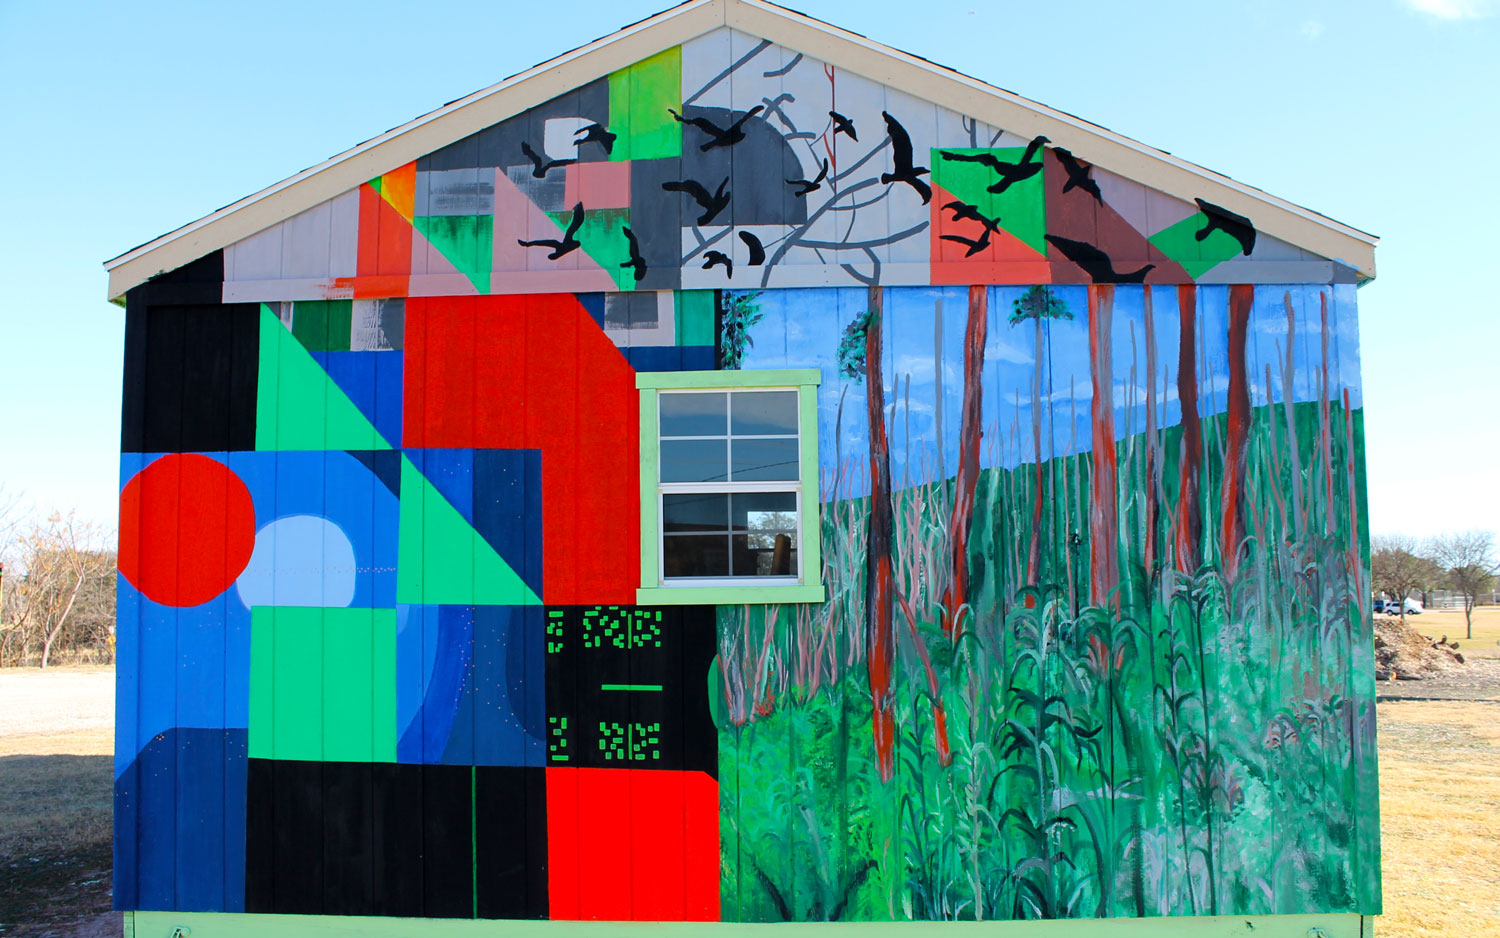 The side of a single-story gabled-roof building, painted with geometric shapes that get partially covered by a nature scene and birds.